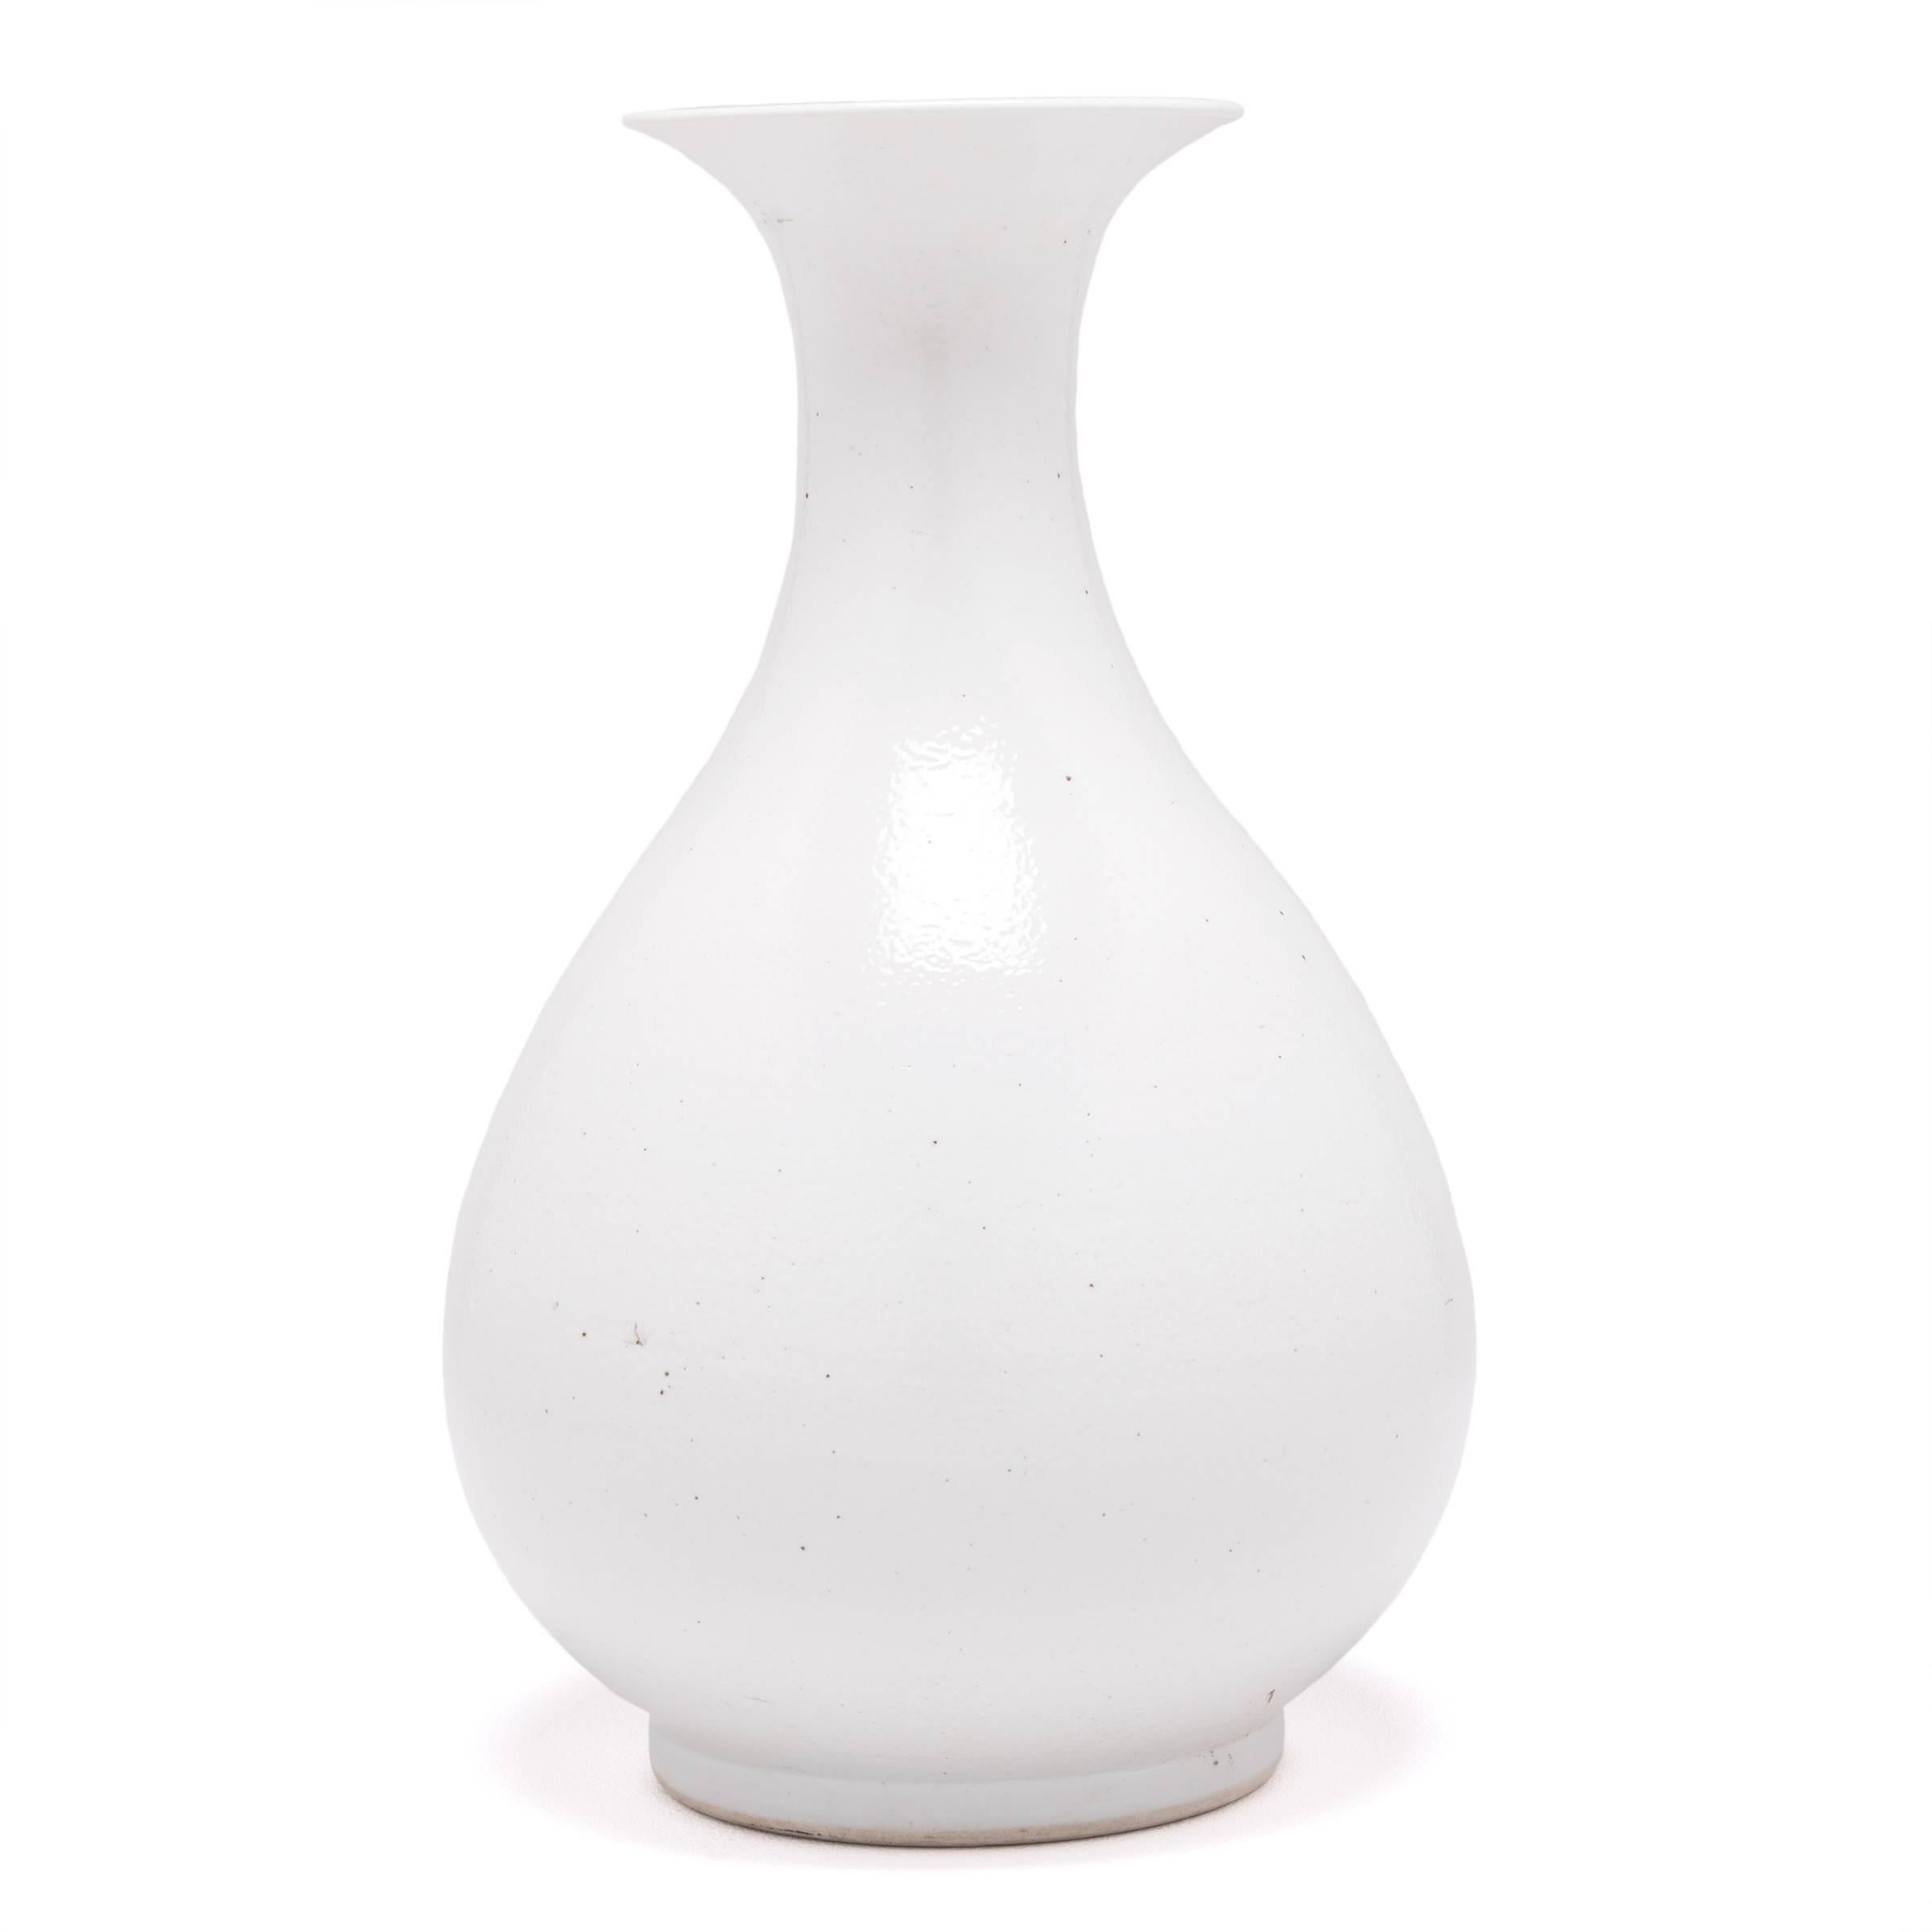 Drawing on a long Chinese tradition of monochrome ceramics, this striking vase is glazed in statement-making white. Inspired by a bird’s fanned out tail, this contemporary example reinterprets this traditional shape with clean lines and an